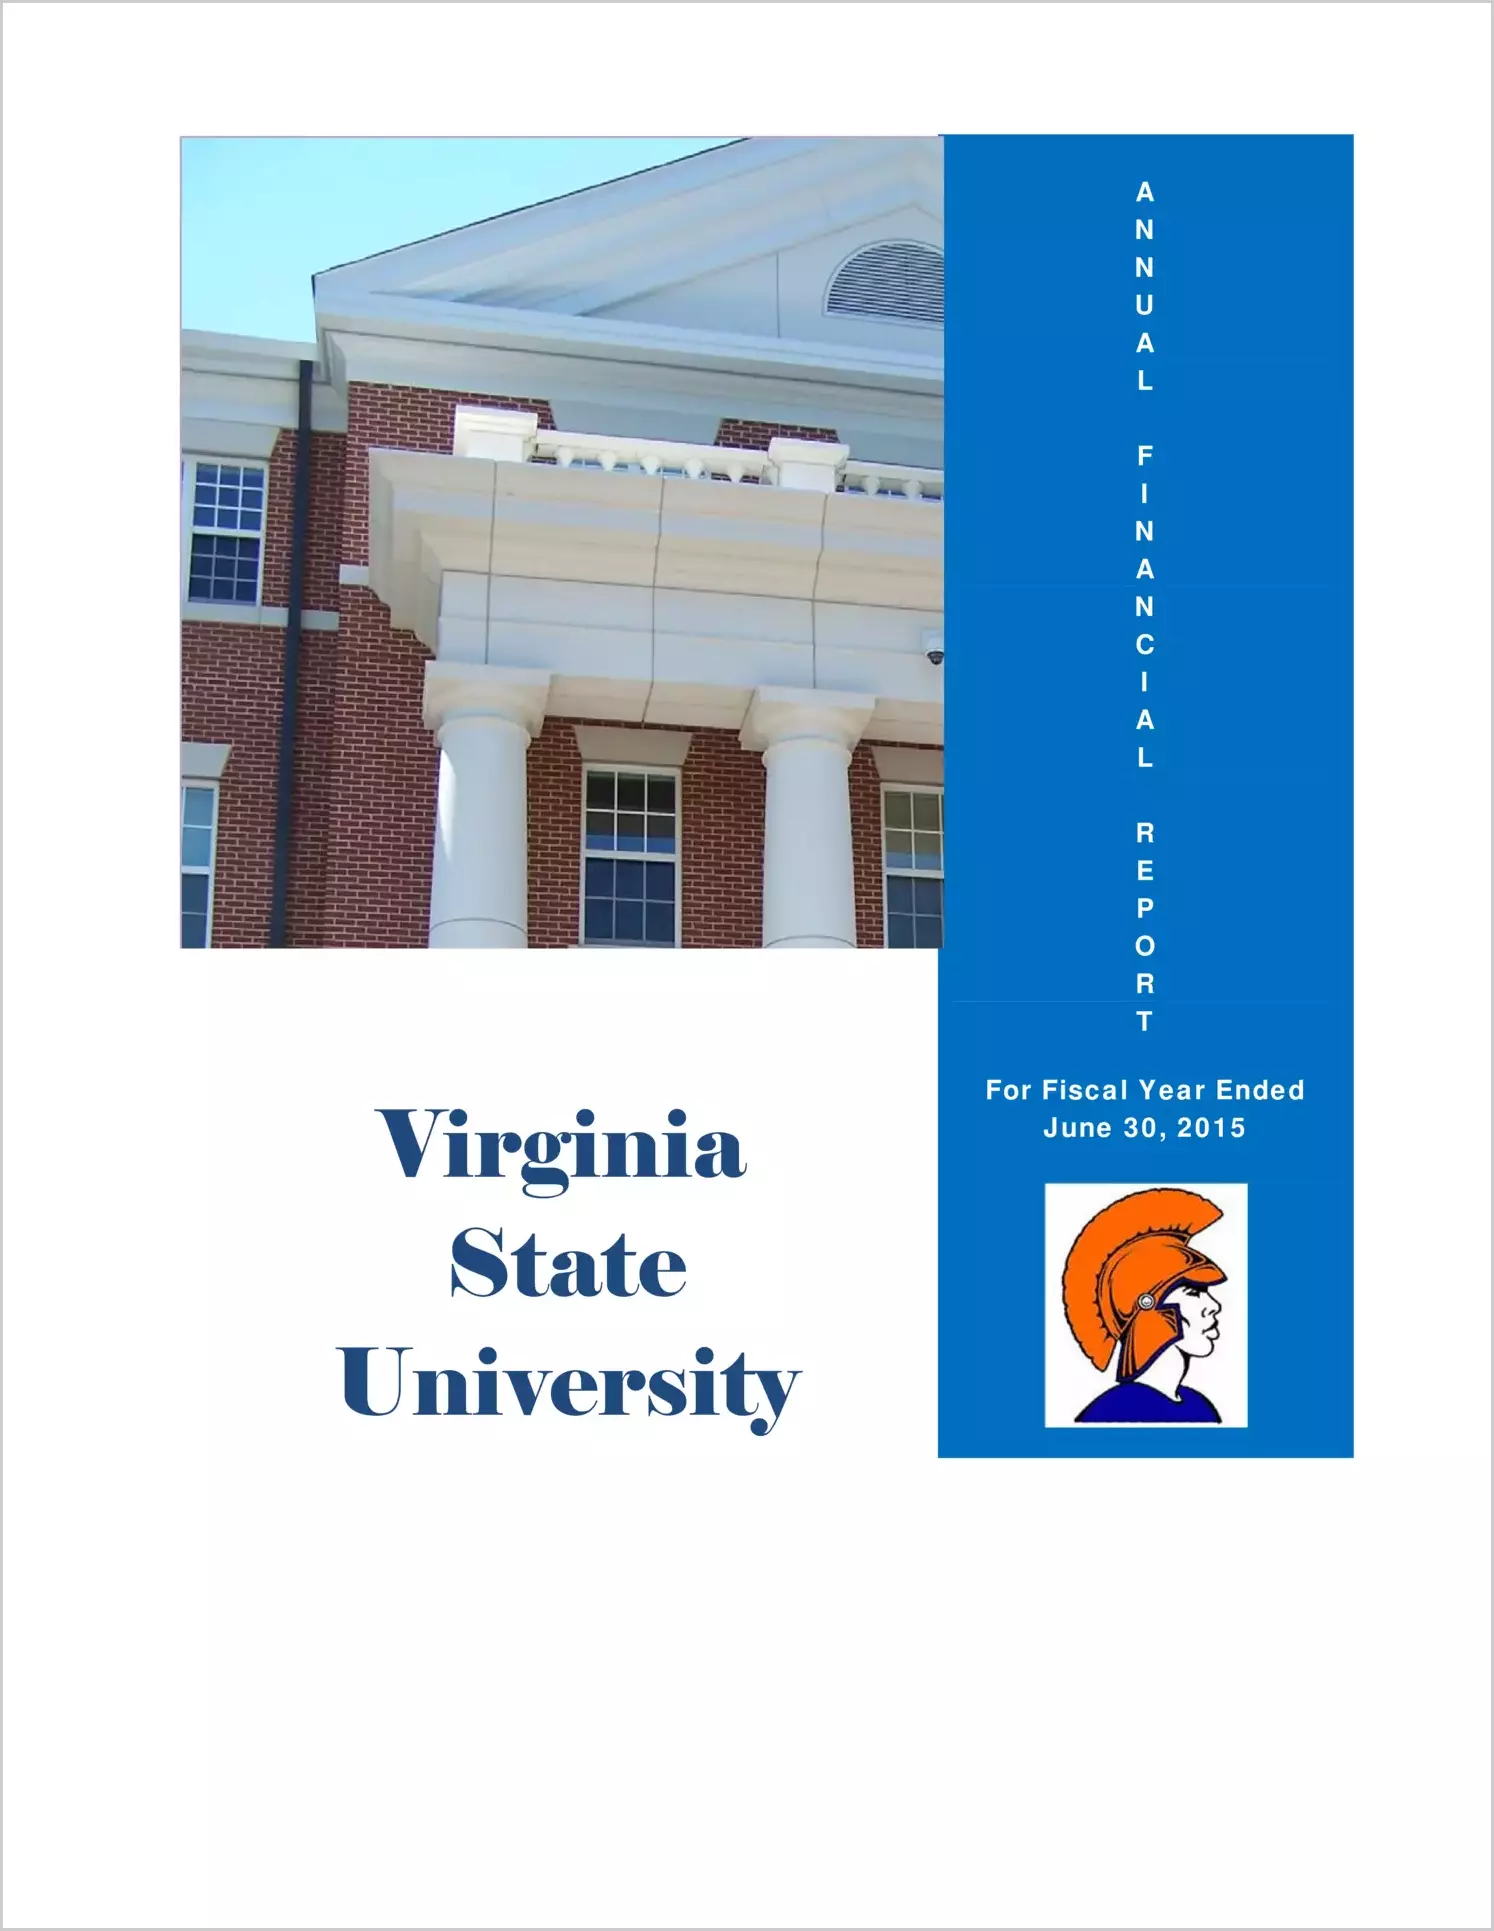 Virginia State University Financial Statement for the year ended June 30, 2015